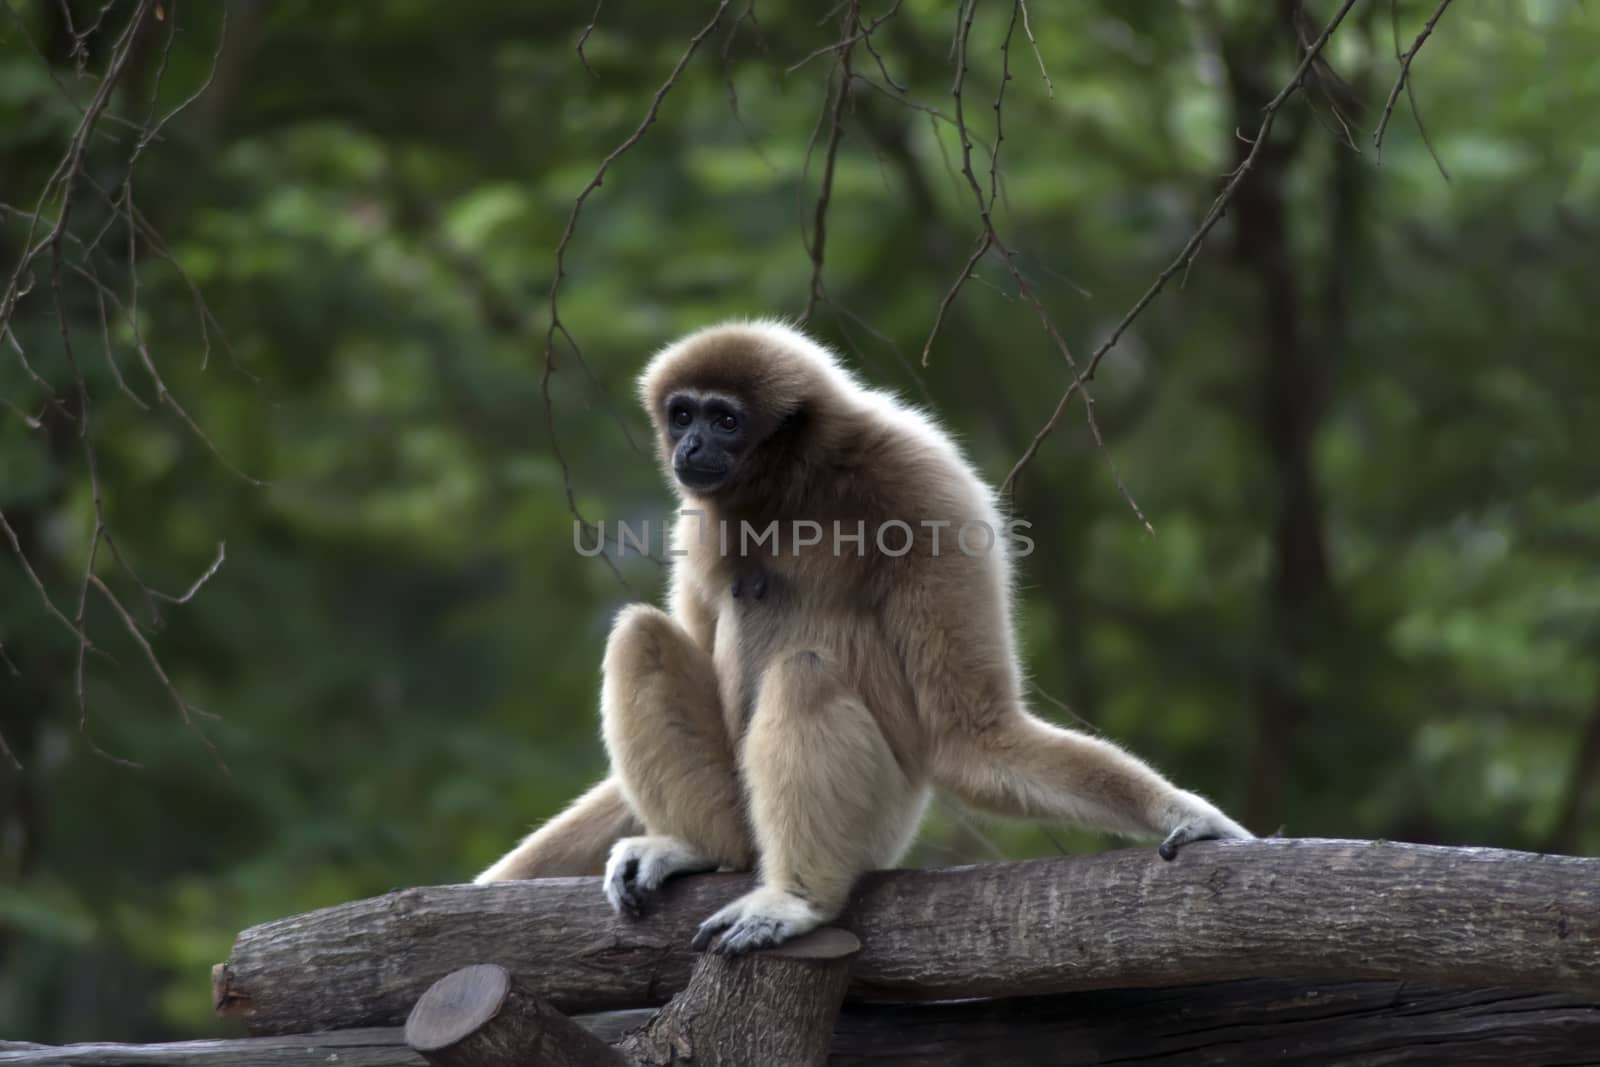 Lar gibbon (Hylobates lar), also known as the white-handed gibbon. Primate is in the gibbon family, Hylobatidae